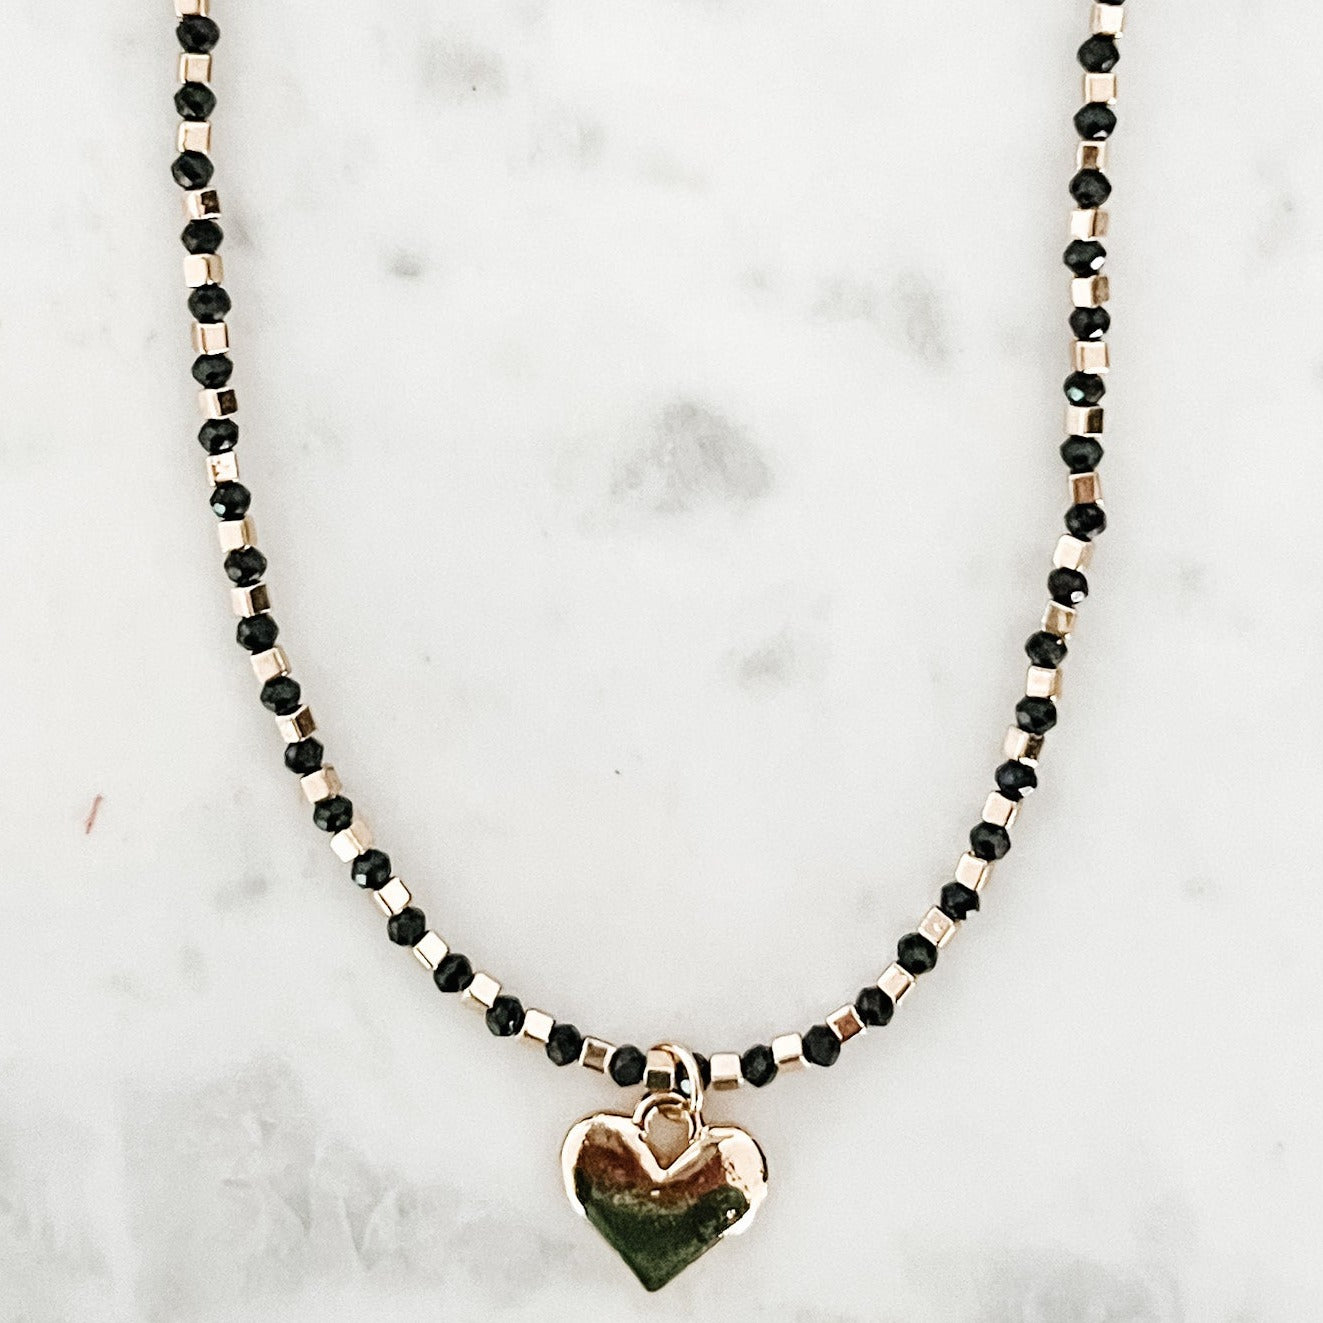 Beaded Necklace with Heart Pendant-Black